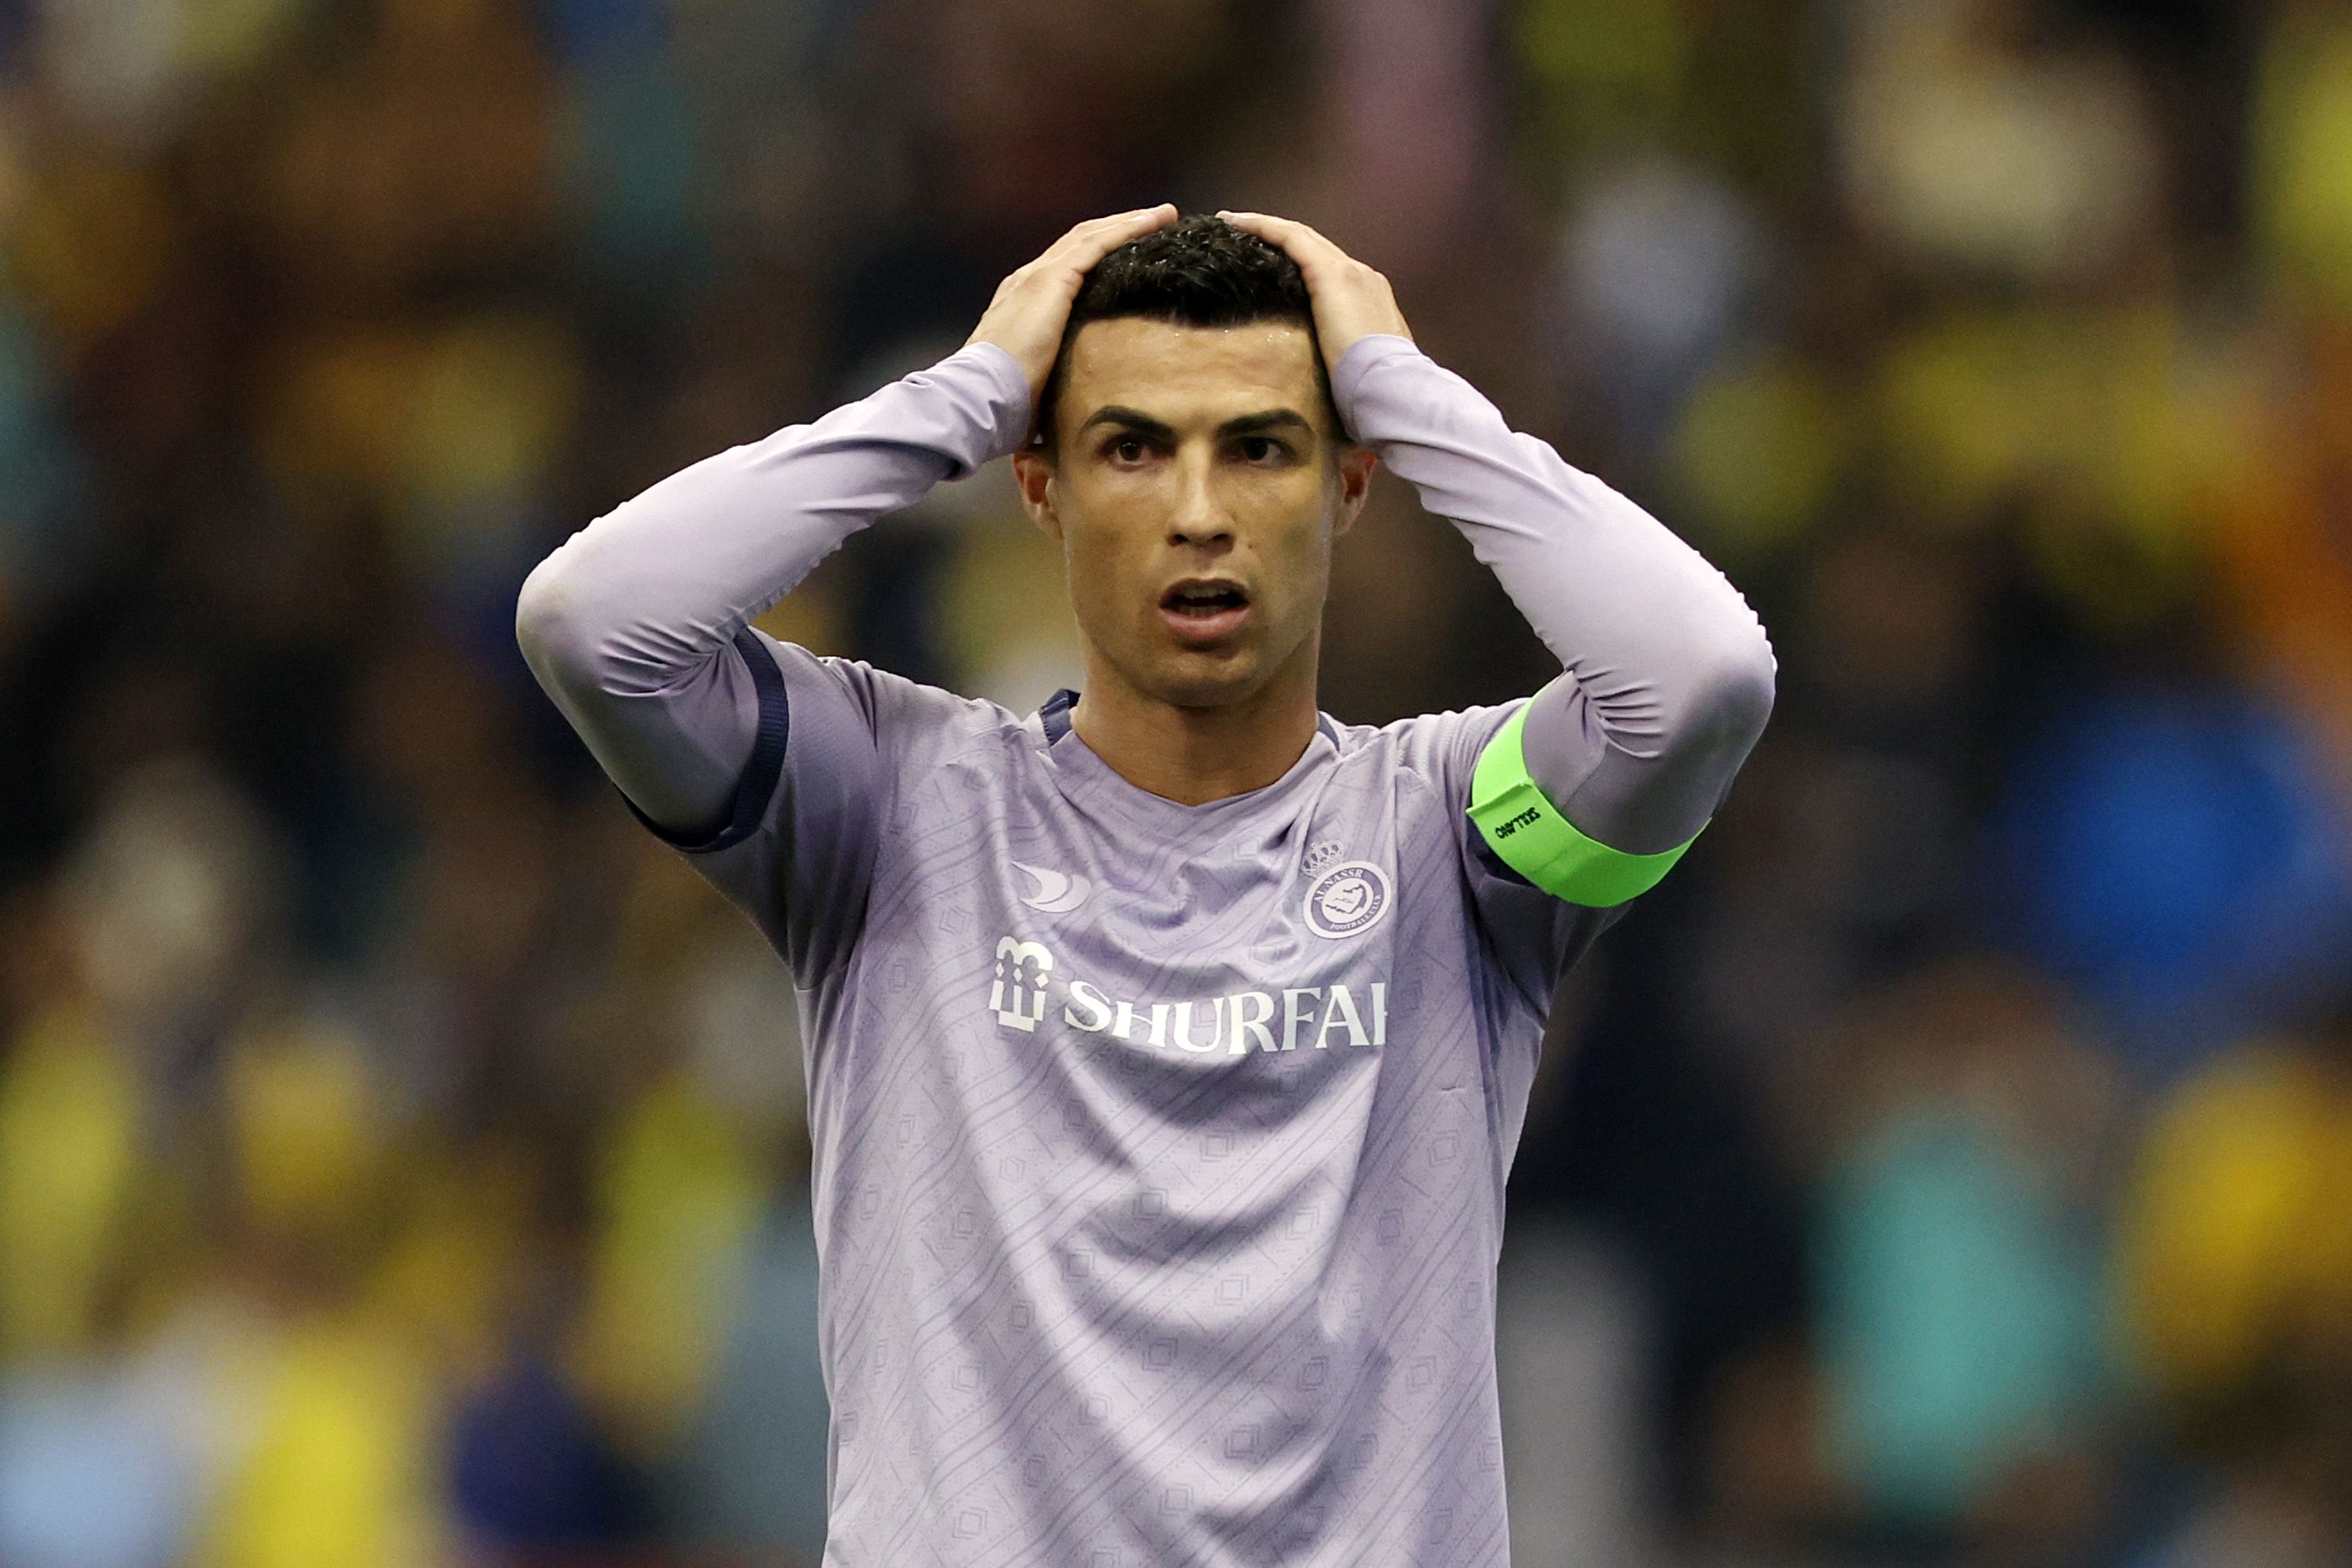 Fans have accused FIFA of mocking Cristiano Ronaldo during The Best ceremony